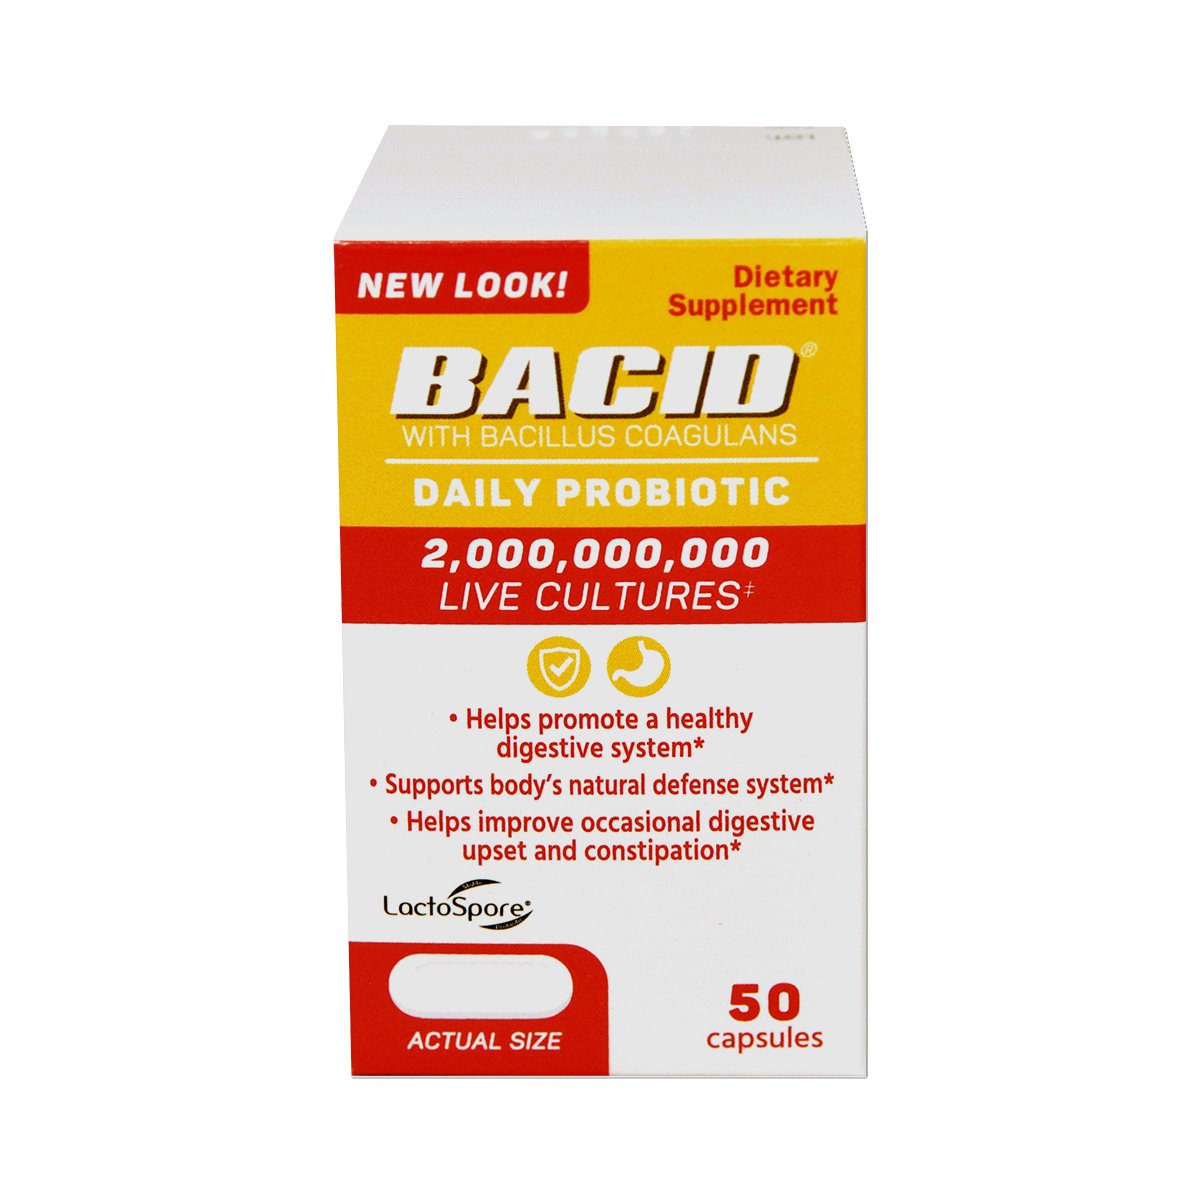 BACID Daily Probiotic, Dietary Supplement for Digestive Health, 2 Billion Bacillus Coagulans Live Cultures, White, 50 Count